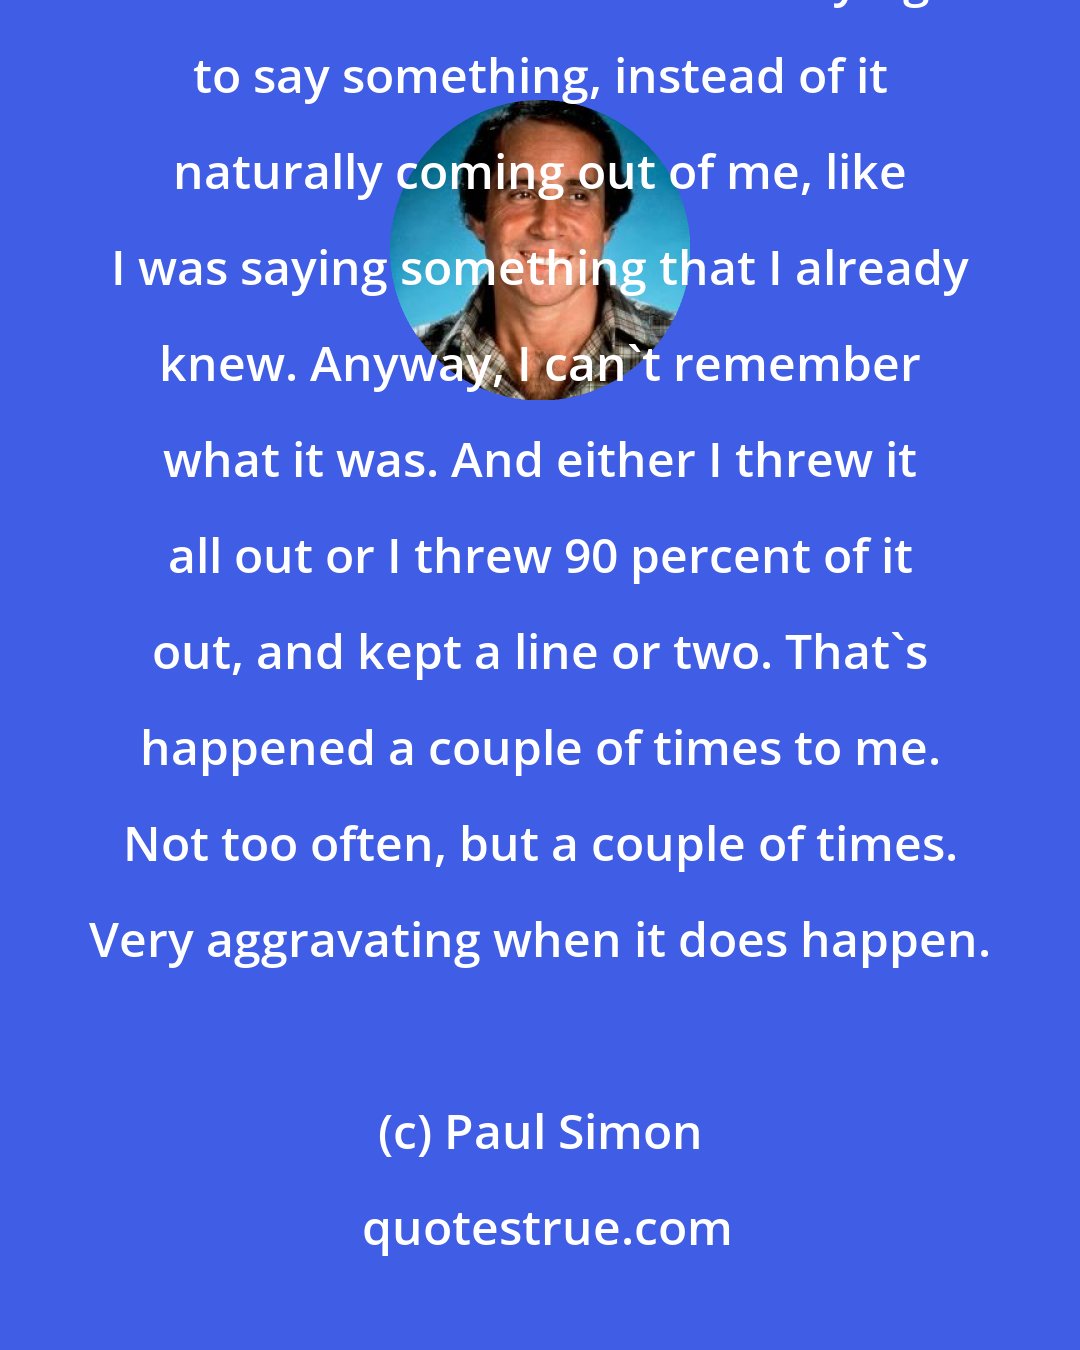 Paul Simon: I just said, you know, this is a great track but this lyric, I don't believe it. It sounds like I'm trying to say something, instead of it naturally coming out of me, like I was saying something that I already knew. Anyway, I can't remember what it was. And either I threw it all out or I threw 90 percent of it out, and kept a line or two. That's happened a couple of times to me. Not too often, but a couple of times. Very aggravating when it does happen.